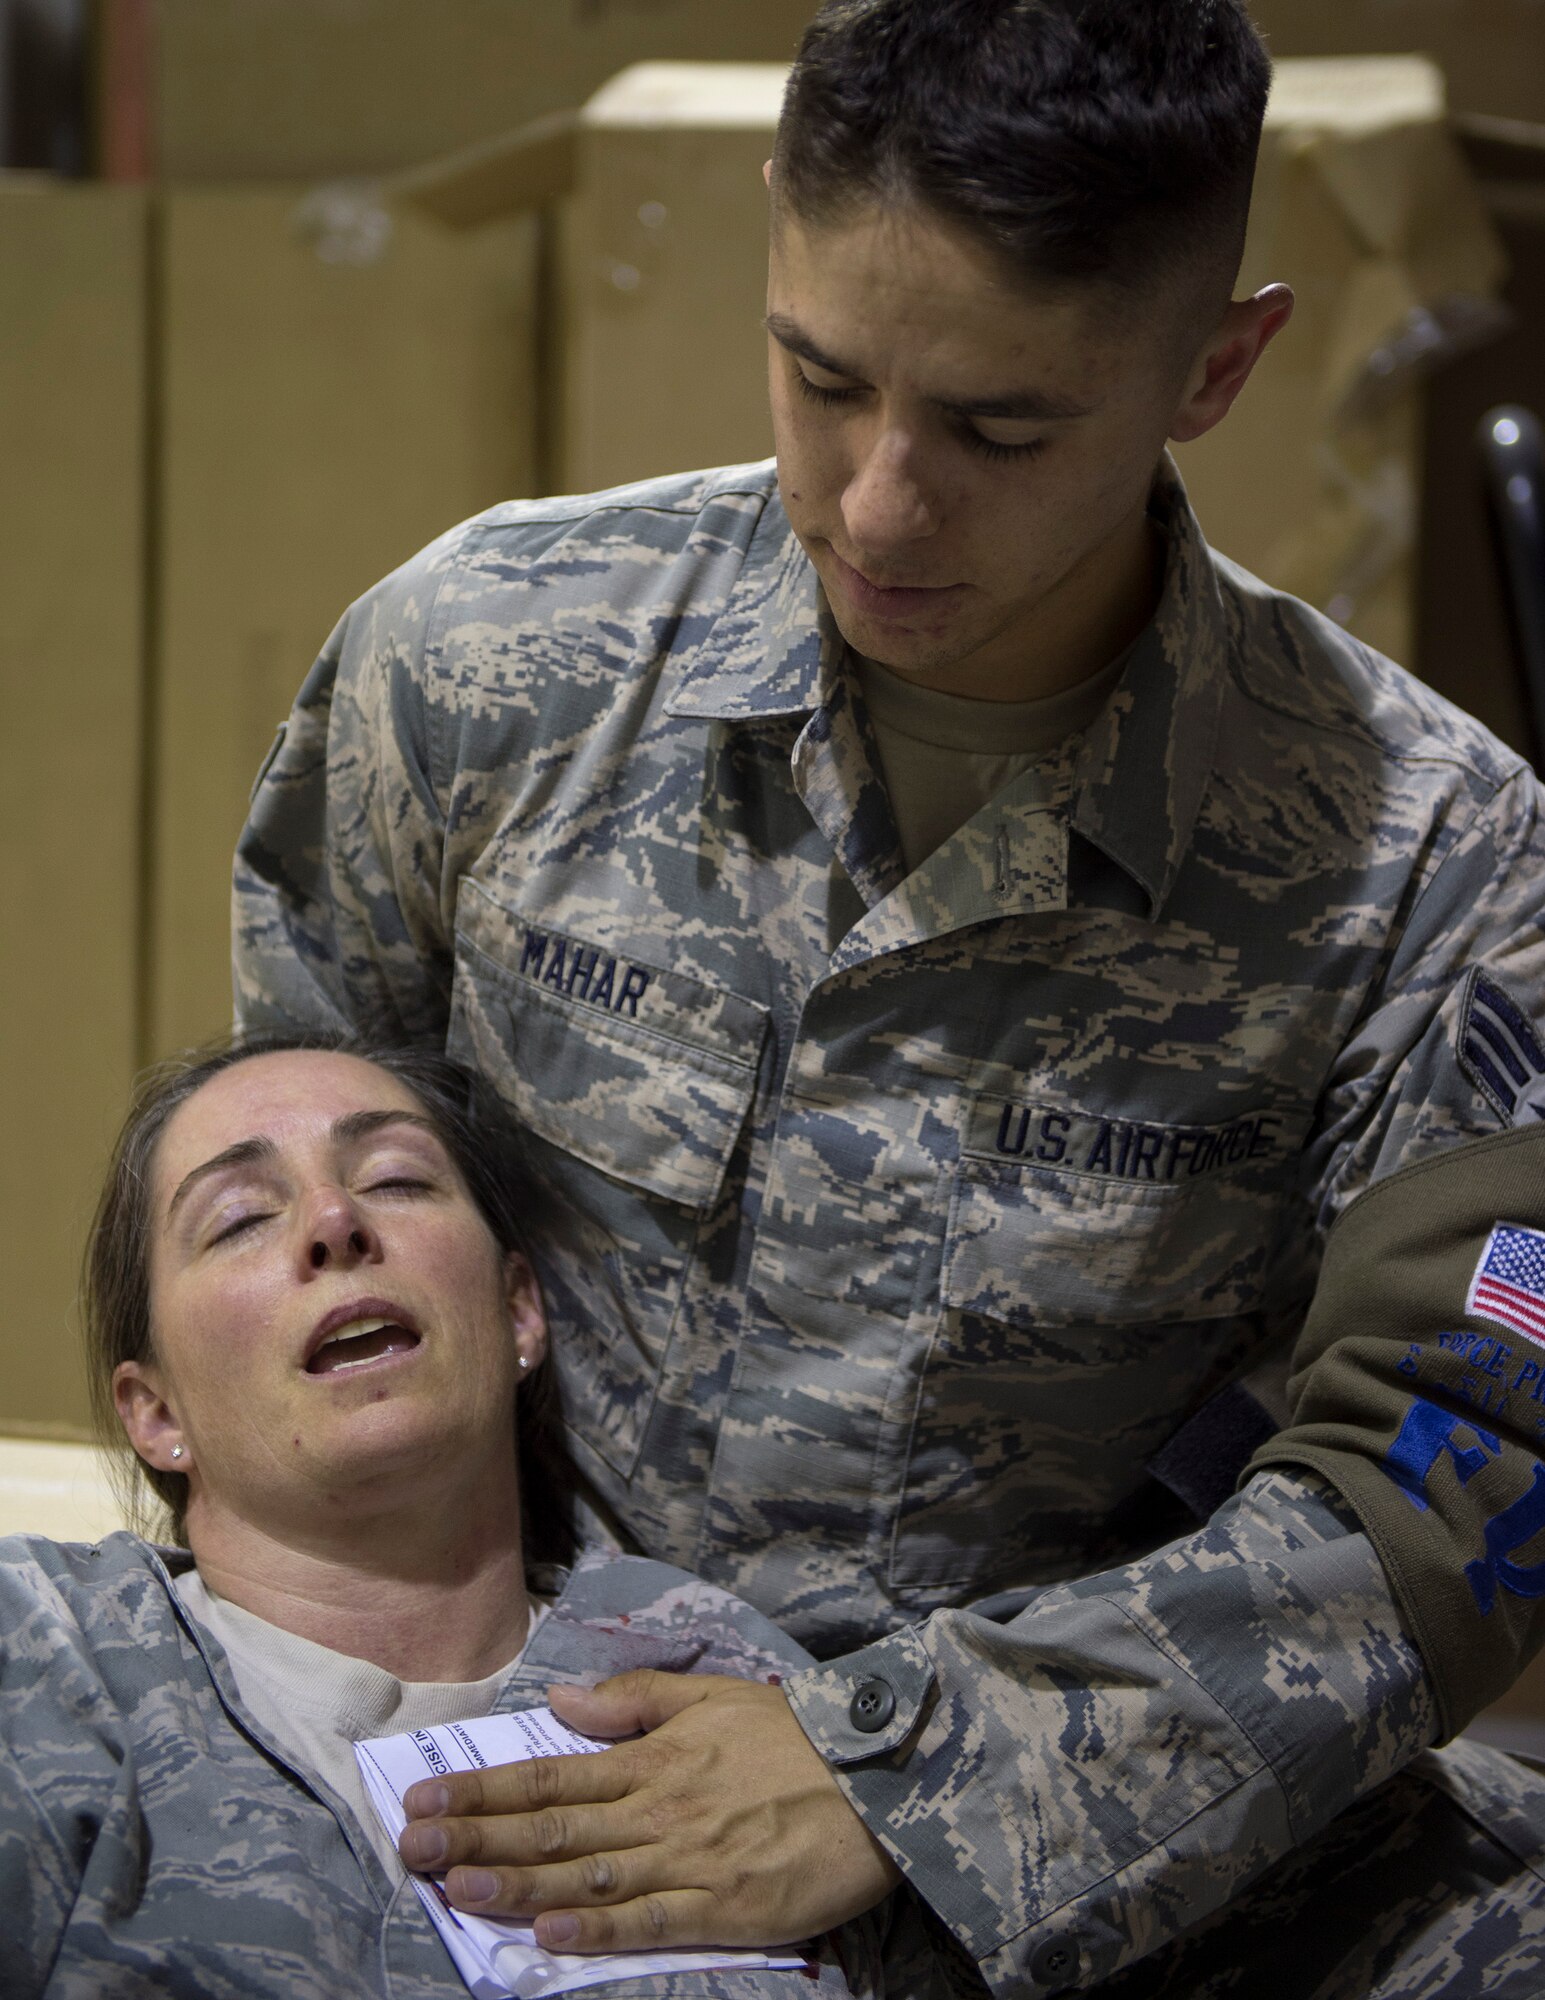 U.S. Air Force Senior Airmen Brandon Mahar, 379th Expeditionary Civil Engineer Squadron Force Protection Flight, gives self-aid buddy care to a victim of the active shooter exercise at Al Udeid Air Base, Qatar, April 17, 2017. The active shooter exercise tested the skills and abilities of Airmen to work with other units in in order to gain a better understanding of each other’s roles in the event of a real-world situation.   (U.S. Air Force photo by Tech. Sgt. Amy M. Lovgren)